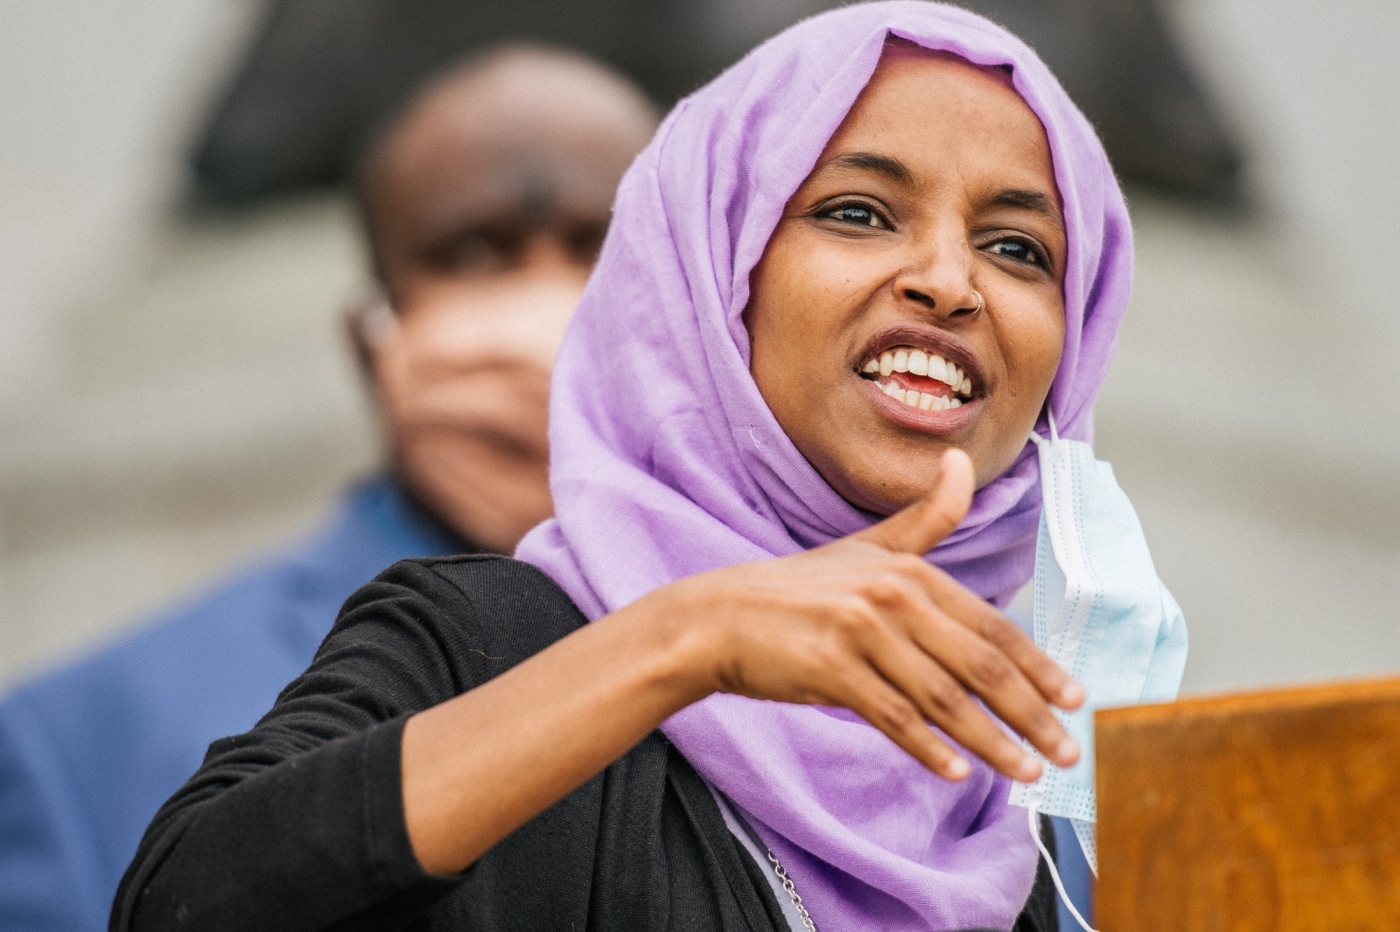 Ilhan Omar represents everything Trump and his allies irrationally fear, says Robert McCaw of CAIR